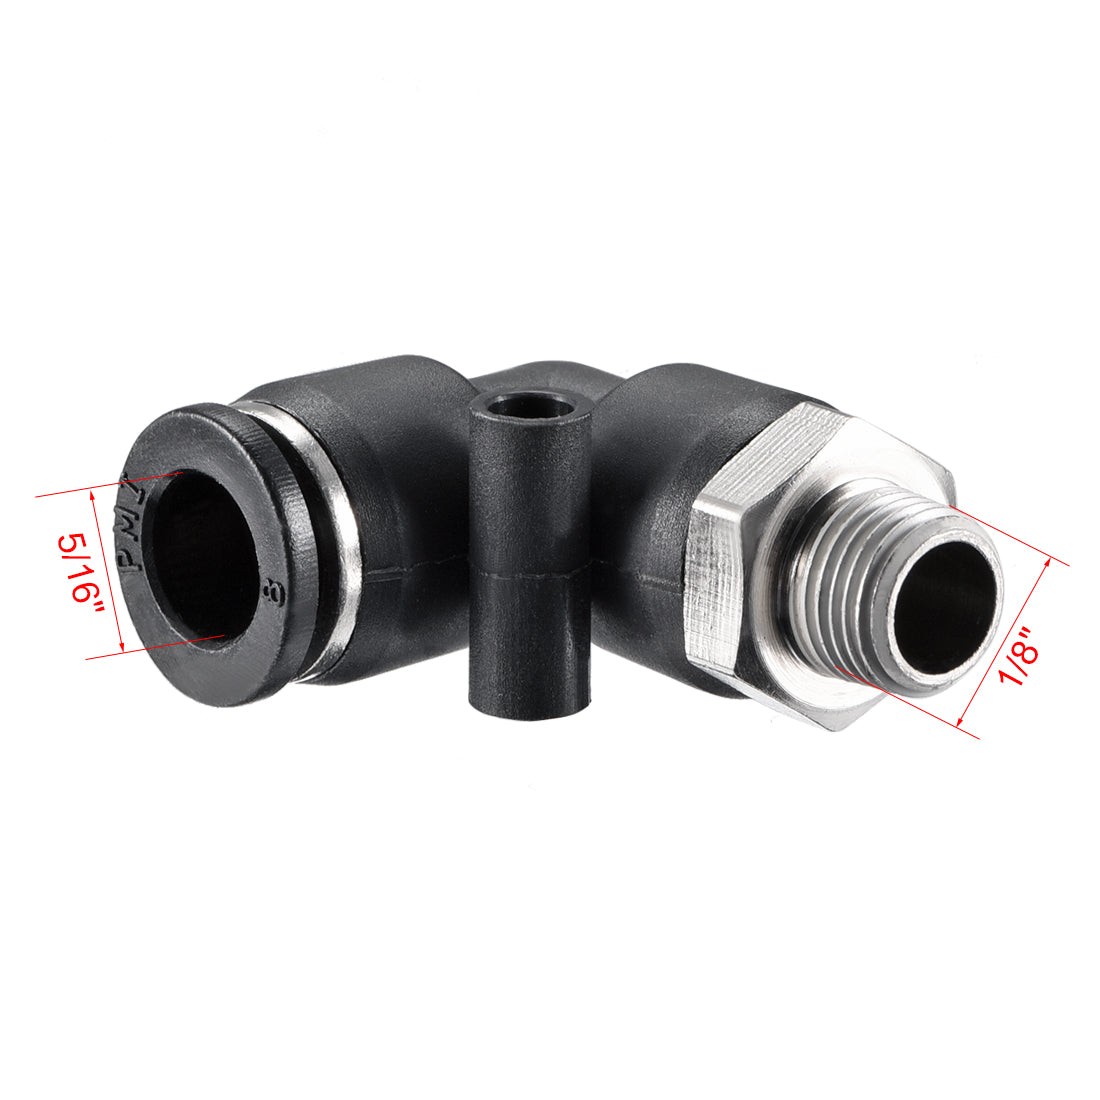 uxcell Uxcell PL8-01 Pneumatic Push to Connect Fitting, Male Elbow - 5/16" Tube OD x 1/8" G Thread  Tube Fitting 10pcs